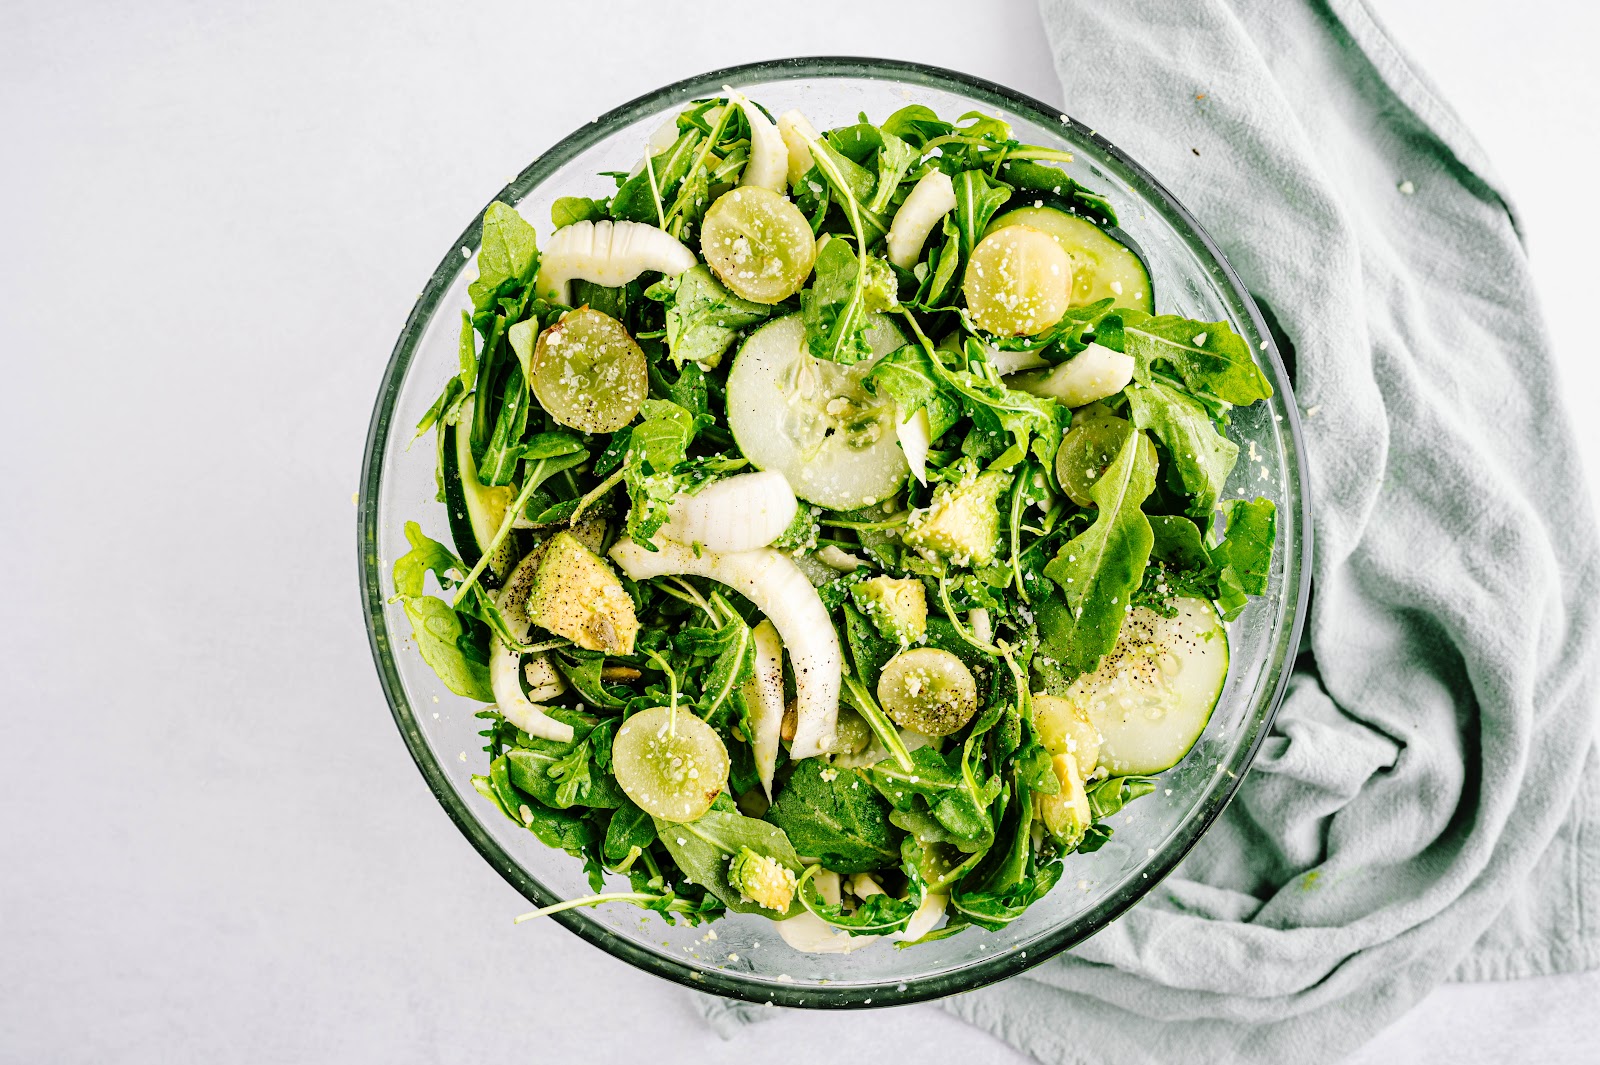 The Best Green Salad Recipe With Fennel, Grapes, and Avocado - The ...